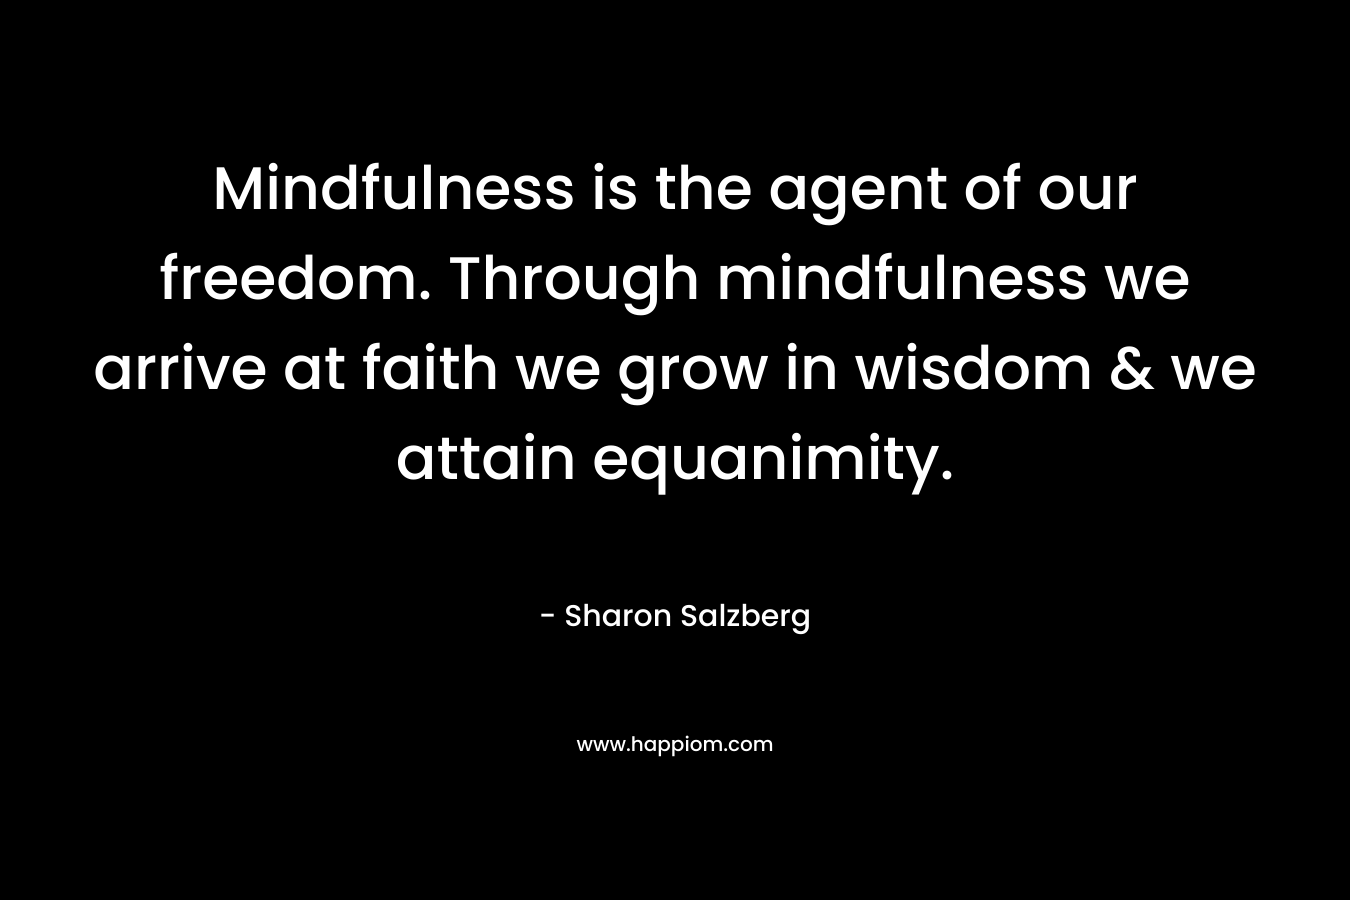 Mindfulness is the agent of our freedom. Through mindfulness we arrive at faith we grow in wisdom & we attain equanimity.